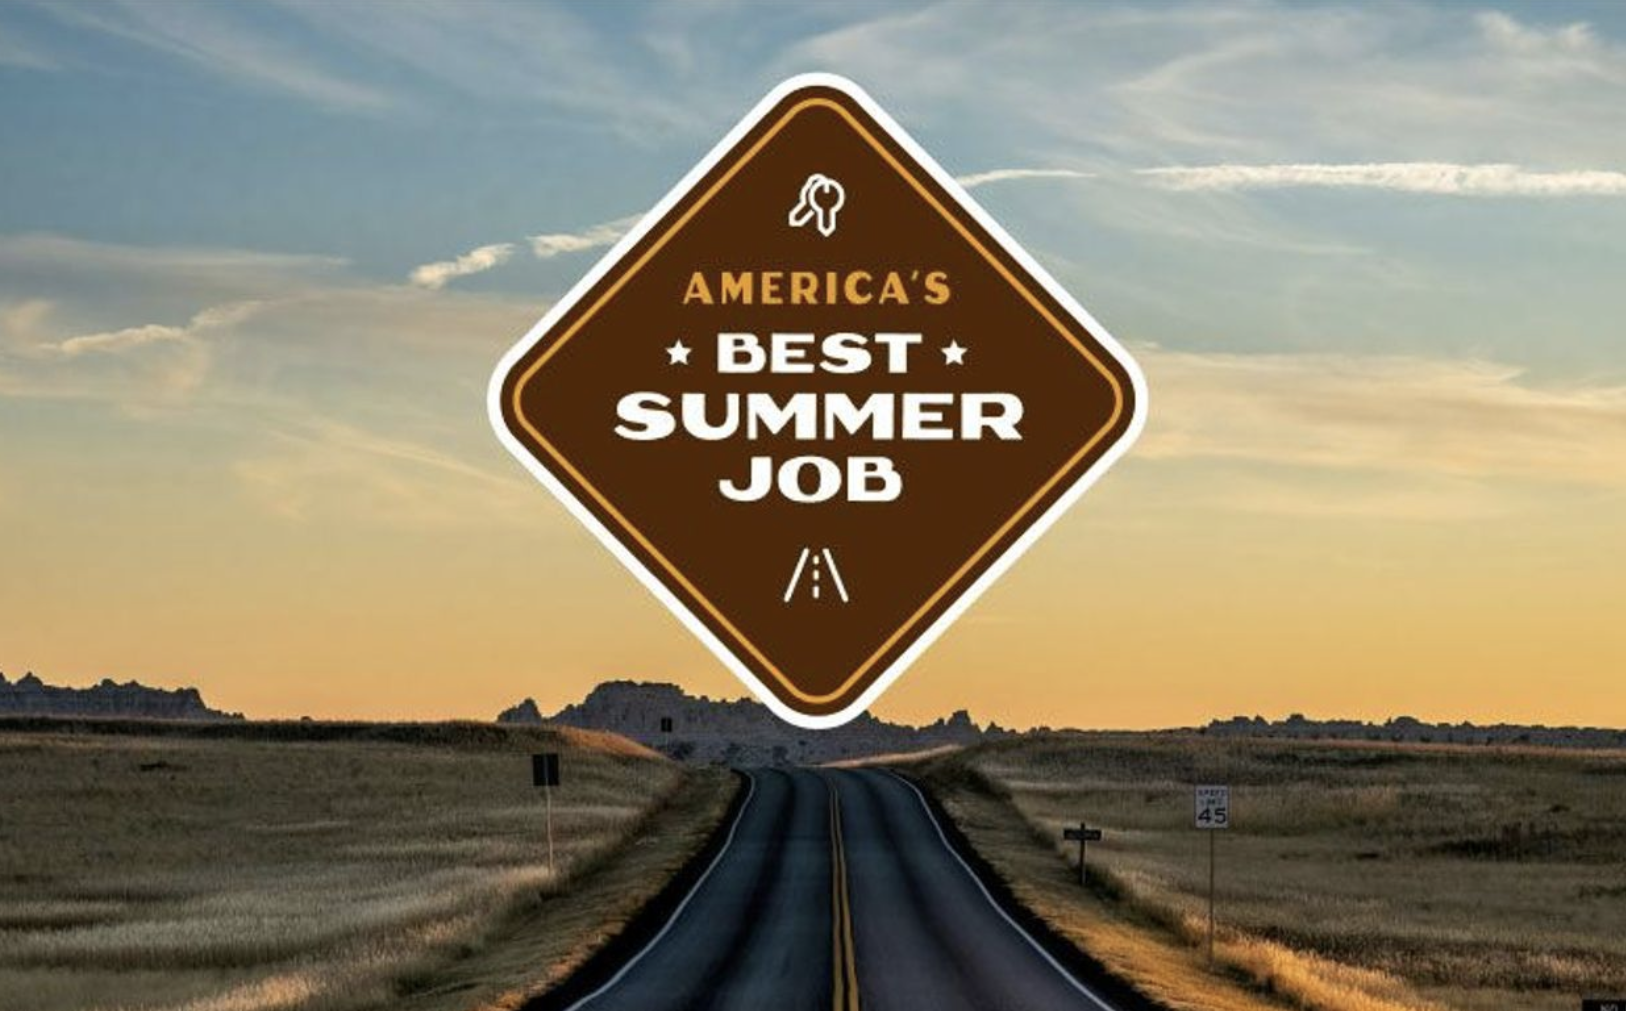 Outdoorsy America's Best Summer Job competition